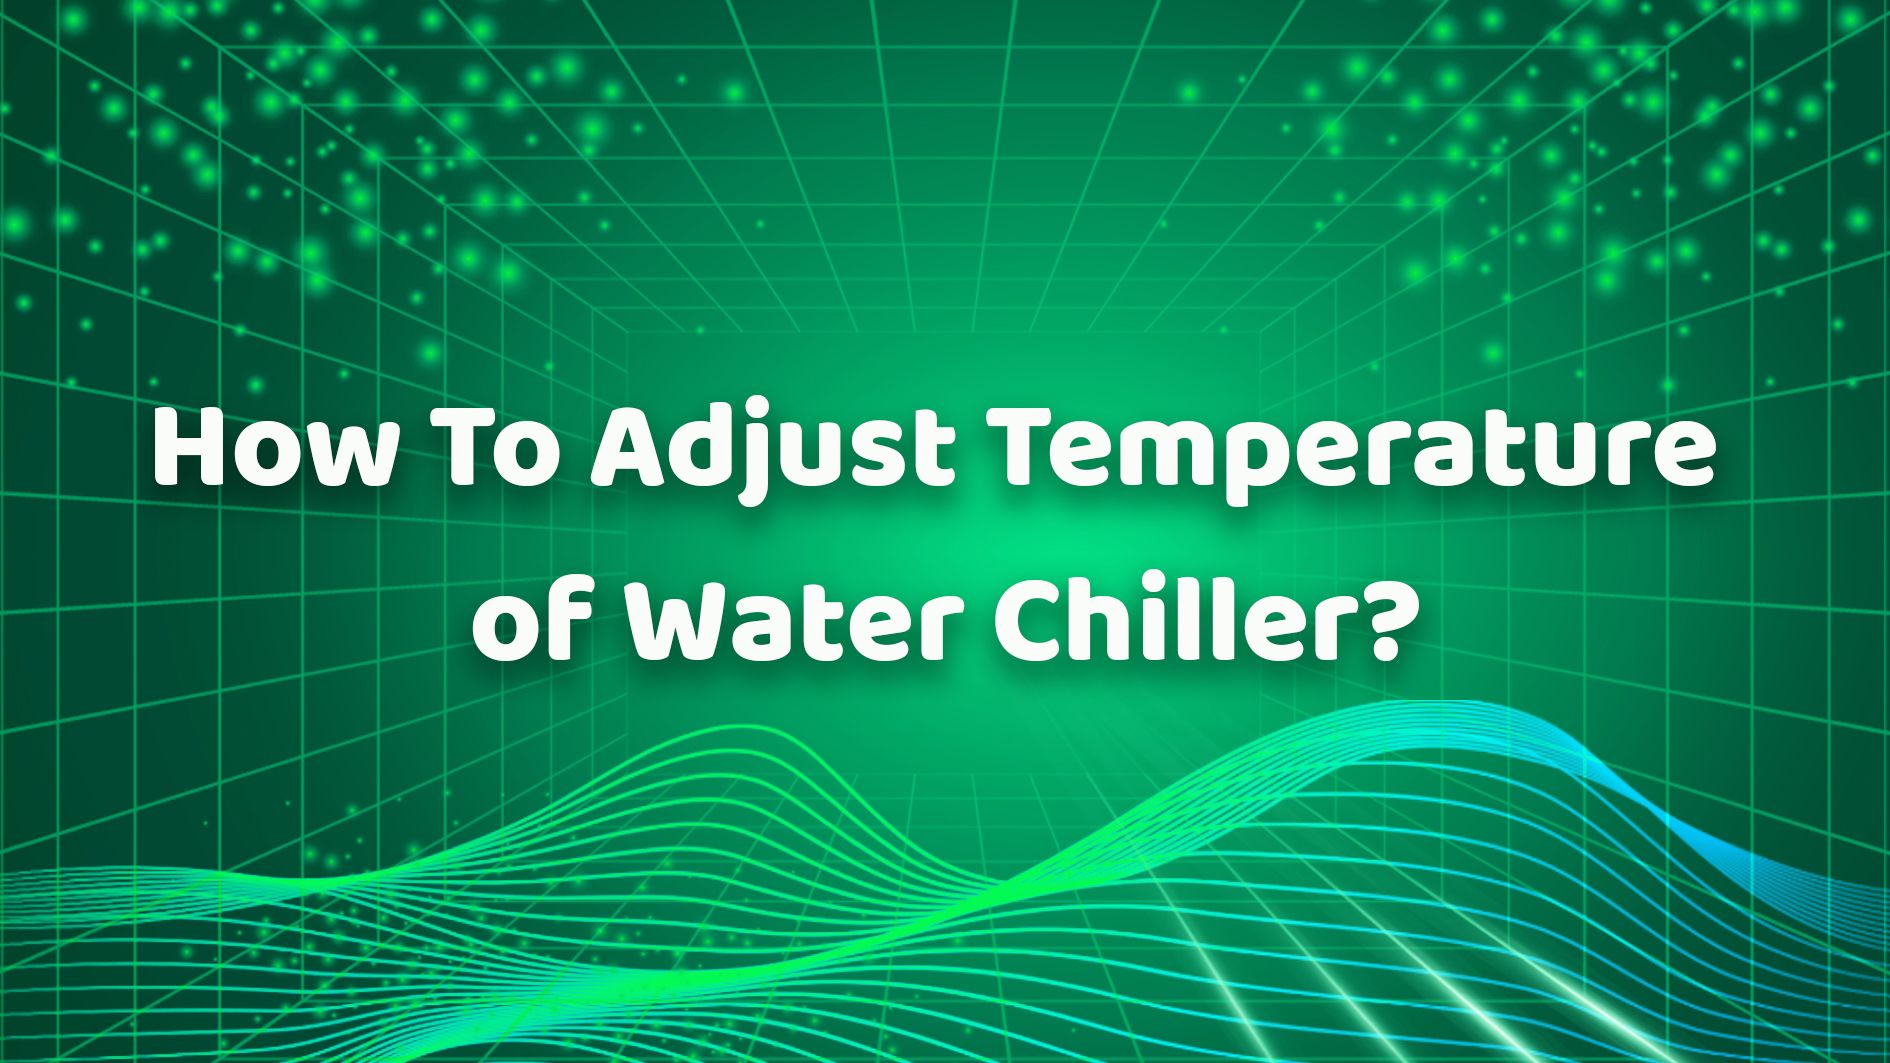 How To Adjust Temperature of Water Chiller？